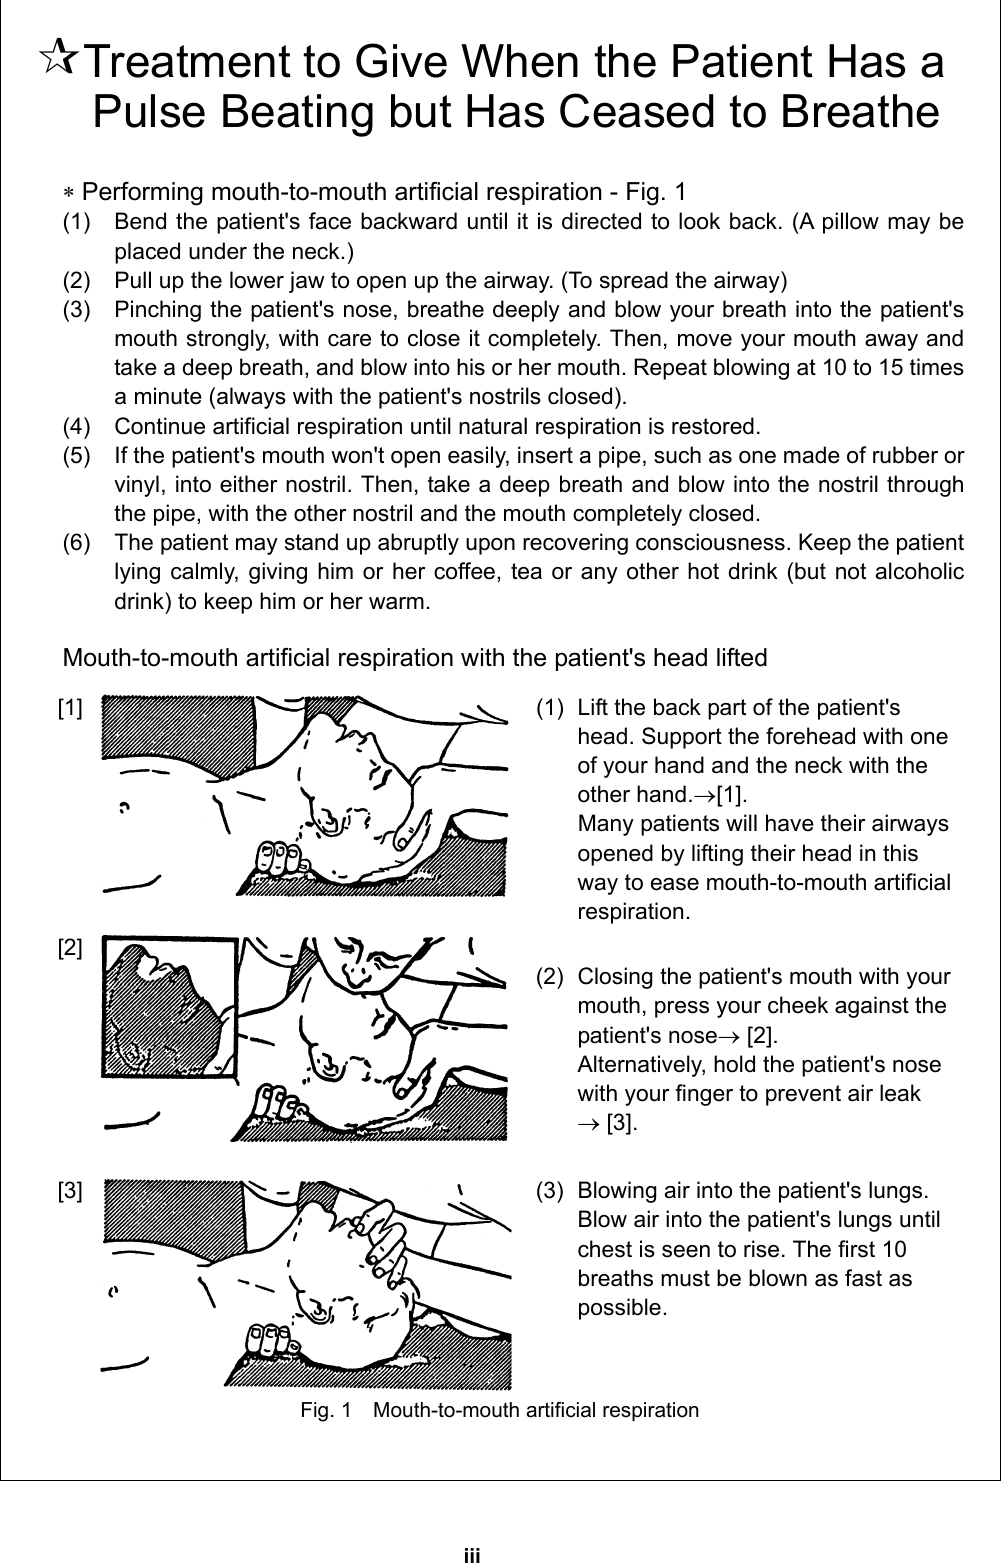 iii   Treatment to Give When the Patient Has a Pulse Beating but Has Ceased to Breathe   Performing mouth-to-mouth artificial respiration - Fig. 1 (1)    Bend the patient&apos;s face backward until it is directed to look back. (A pillow may be placed under the neck.)   (2)    Pull up the lower jaw to open up the airway. (To spread the airway)   (3)    Pinching the patient&apos;s nose, breathe deeply and blow your breath into the patient&apos;s mouth strongly, with care to close it completely. Then, move your mouth away and take a deep breath, and blow into his or her mouth. Repeat blowing at 10 to 15 times a minute (always with the patient&apos;s nostrils closed).   (4)    Continue artificial respiration until natural respiration is restored.   (5)    If the patient&apos;s mouth won&apos;t open easily, insert a pipe, such as one made of rubber or vinyl, into either nostril. Then, take a deep breath and blow into the nostril through the pipe, with the other nostril and the mouth completely closed.   (6)    The patient may stand up abruptly upon recovering consciousness. Keep the patient lying calmly, giving him or her coffee, tea or any other hot drink (but not alcoholic drink) to keep him or her warm.    Mouth-to-mouth artificial respiration with the patient&apos;s head lifted [1]  (1)  Lift the back part of the patient&apos;s head. Support the forehead with one of your hand and the neck with the other hand.[1].  Many patients will have their airways opened by lifting their head in this way to ease mouth-to-mouth artificial respiration.  [2]    (2)  Closing the patient&apos;s mouth with your mouth, press your cheek against the patient&apos;s nose [2]. Alternatively, hold the patient&apos;s nose with your finger to prevent air leak    [3].   [3]  (3)  Blowing air into the patient&apos;s lungs. Blow air into the patient&apos;s lungs until chest is seen to rise. The first 10 breaths must be blown as fast as possible.  Fig. 1    Mouth-to-mouth artificial respiration  